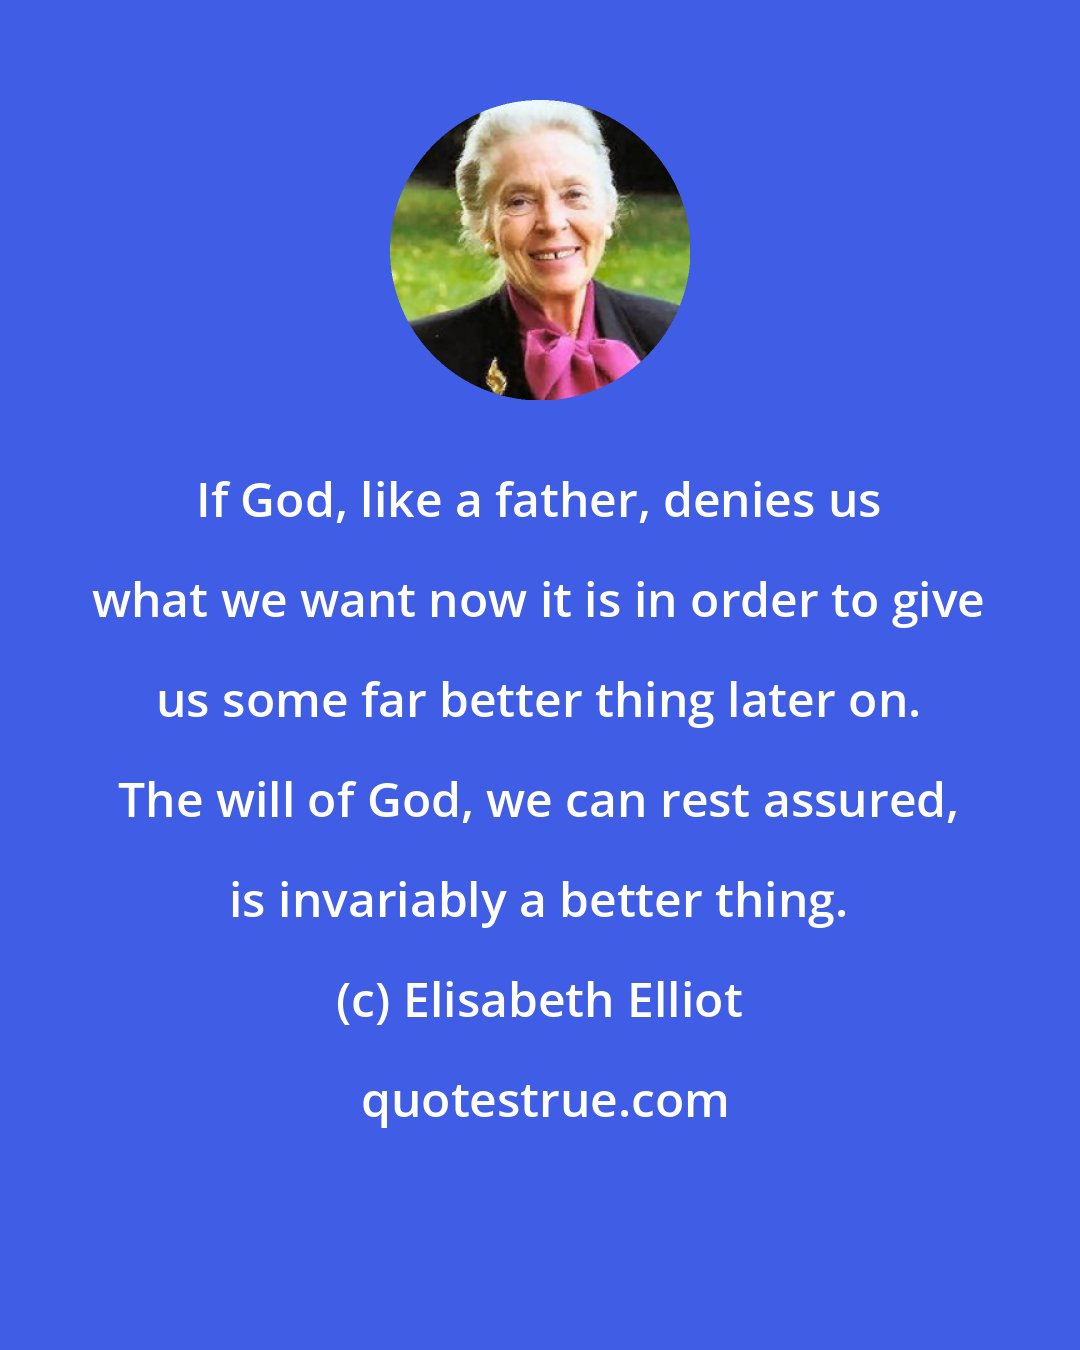 Elisabeth Elliot: If God, like a father, denies us what we want now it is in order to give us some far better thing later on. The will of God, we can rest assured, is invariably a better thing.